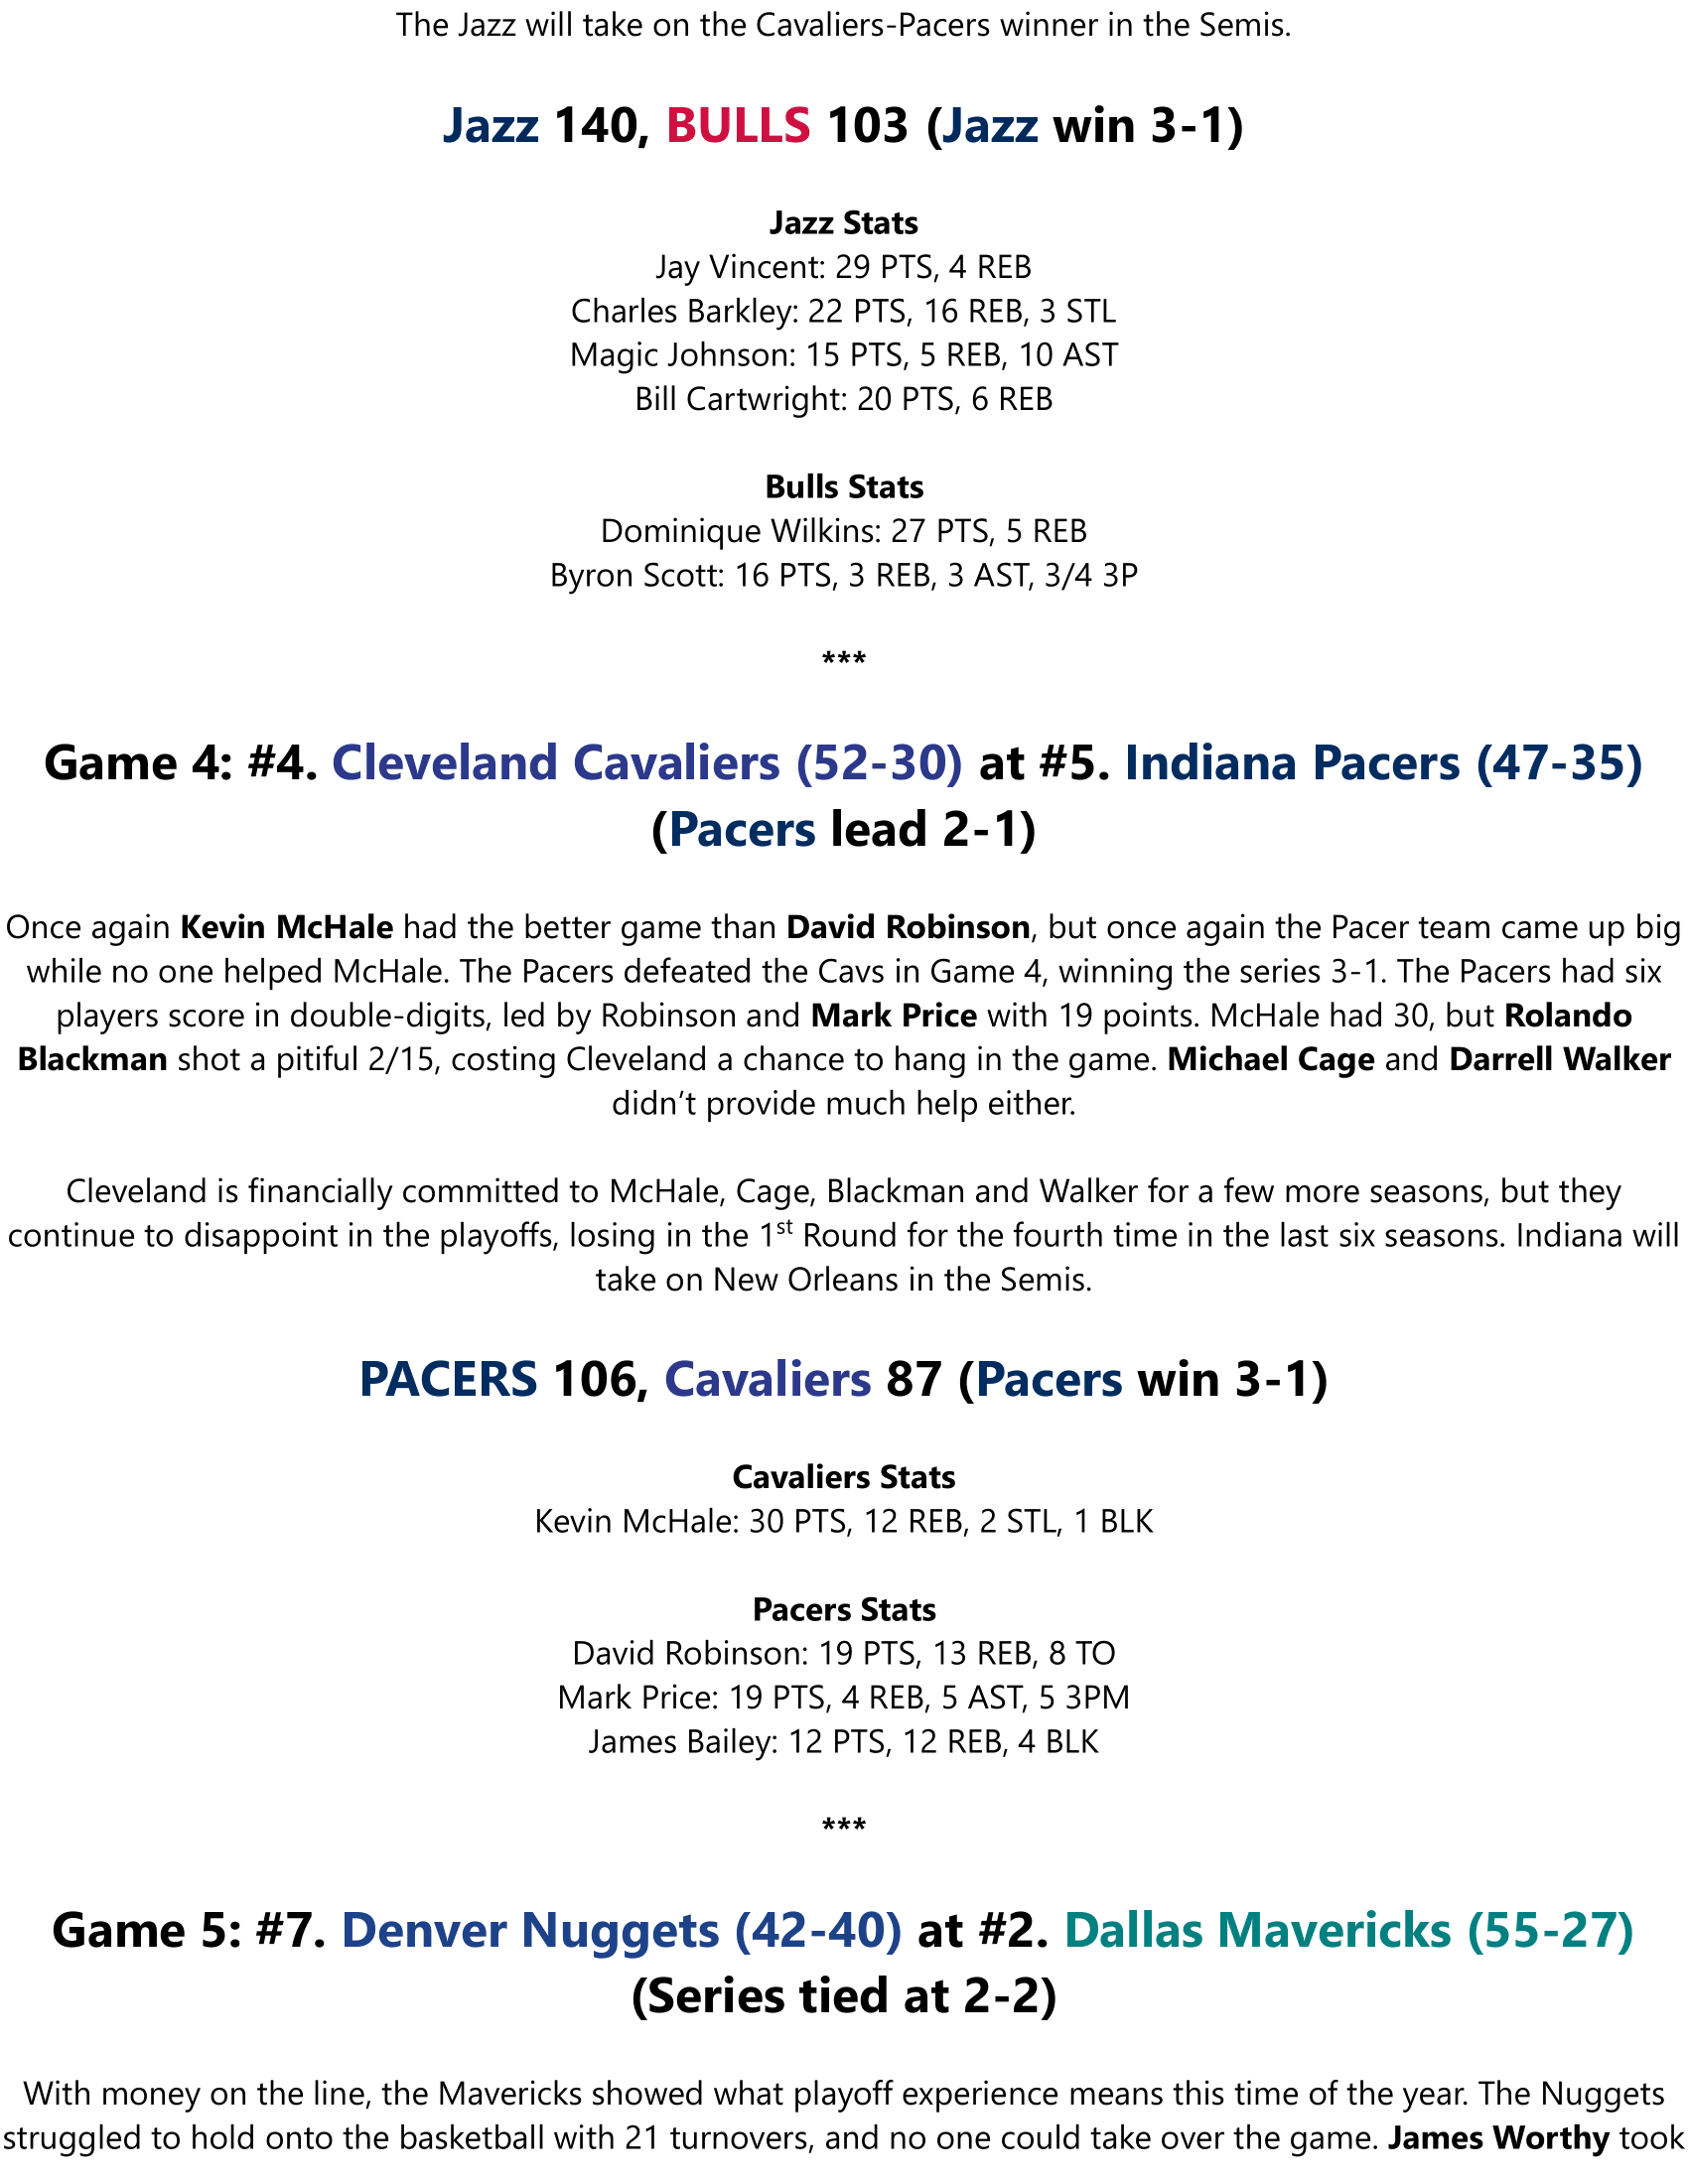 88-89-Part-5-Round-1-Semi-Preview-15.png